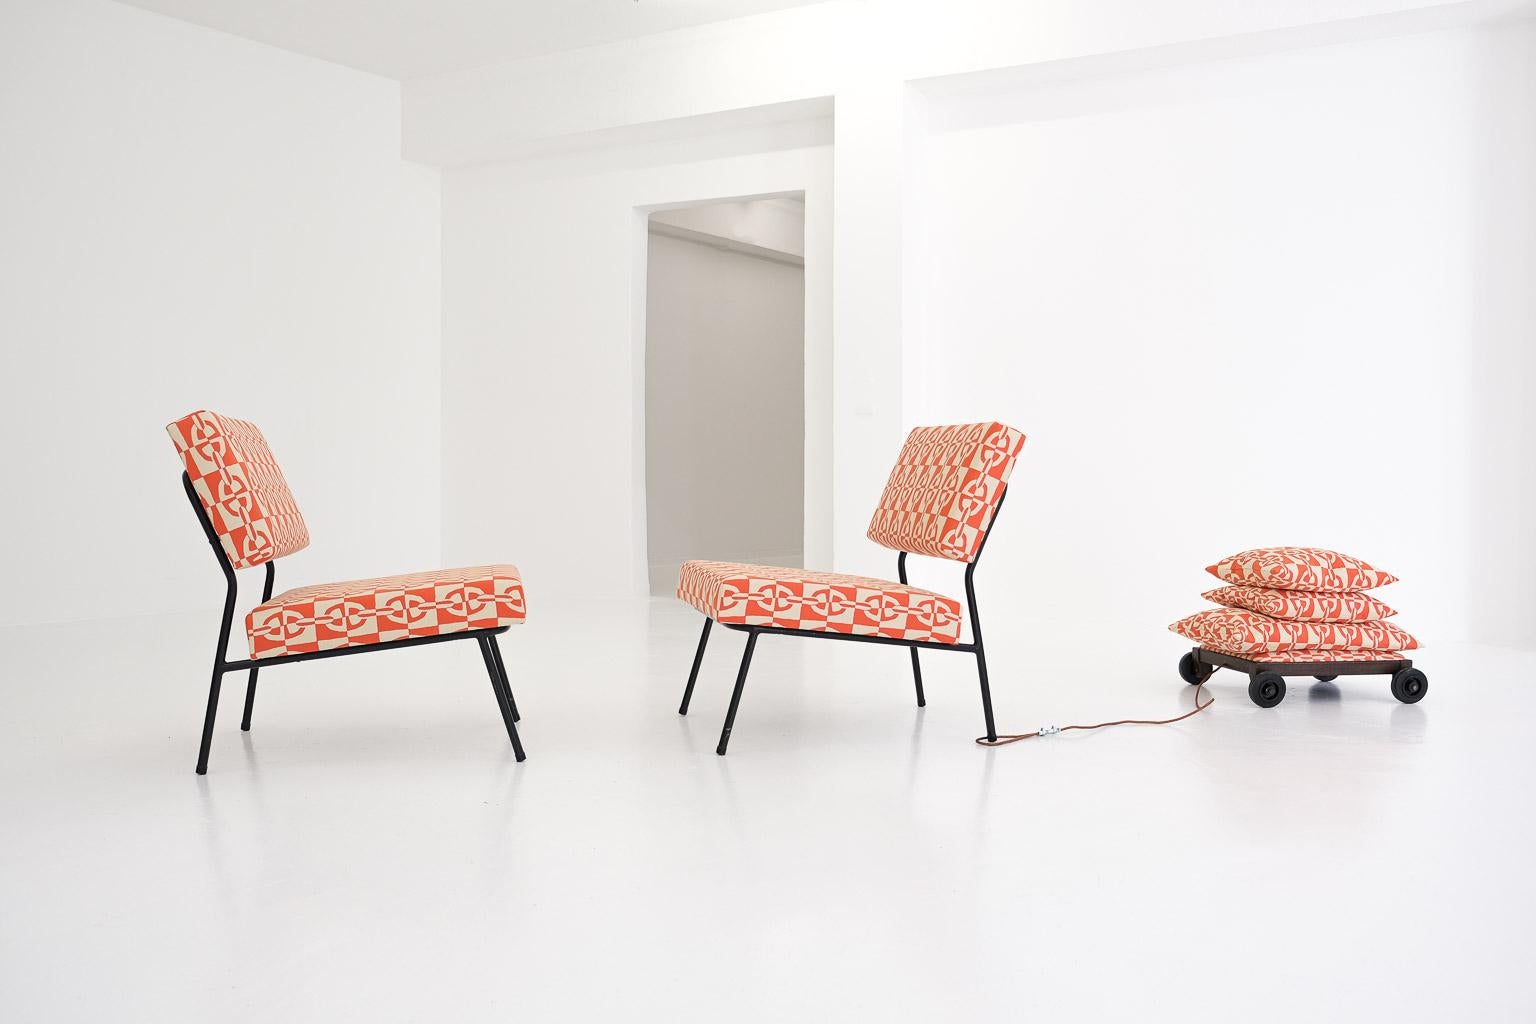 You may know these easy chairs designed by Paul Geoffroy in the early 1950s for Airborne, France. But you’ve never seen Hermès fabric on these chairs: we decided to go full luxury. With expertly reupholstered, new seat covers in the Classic